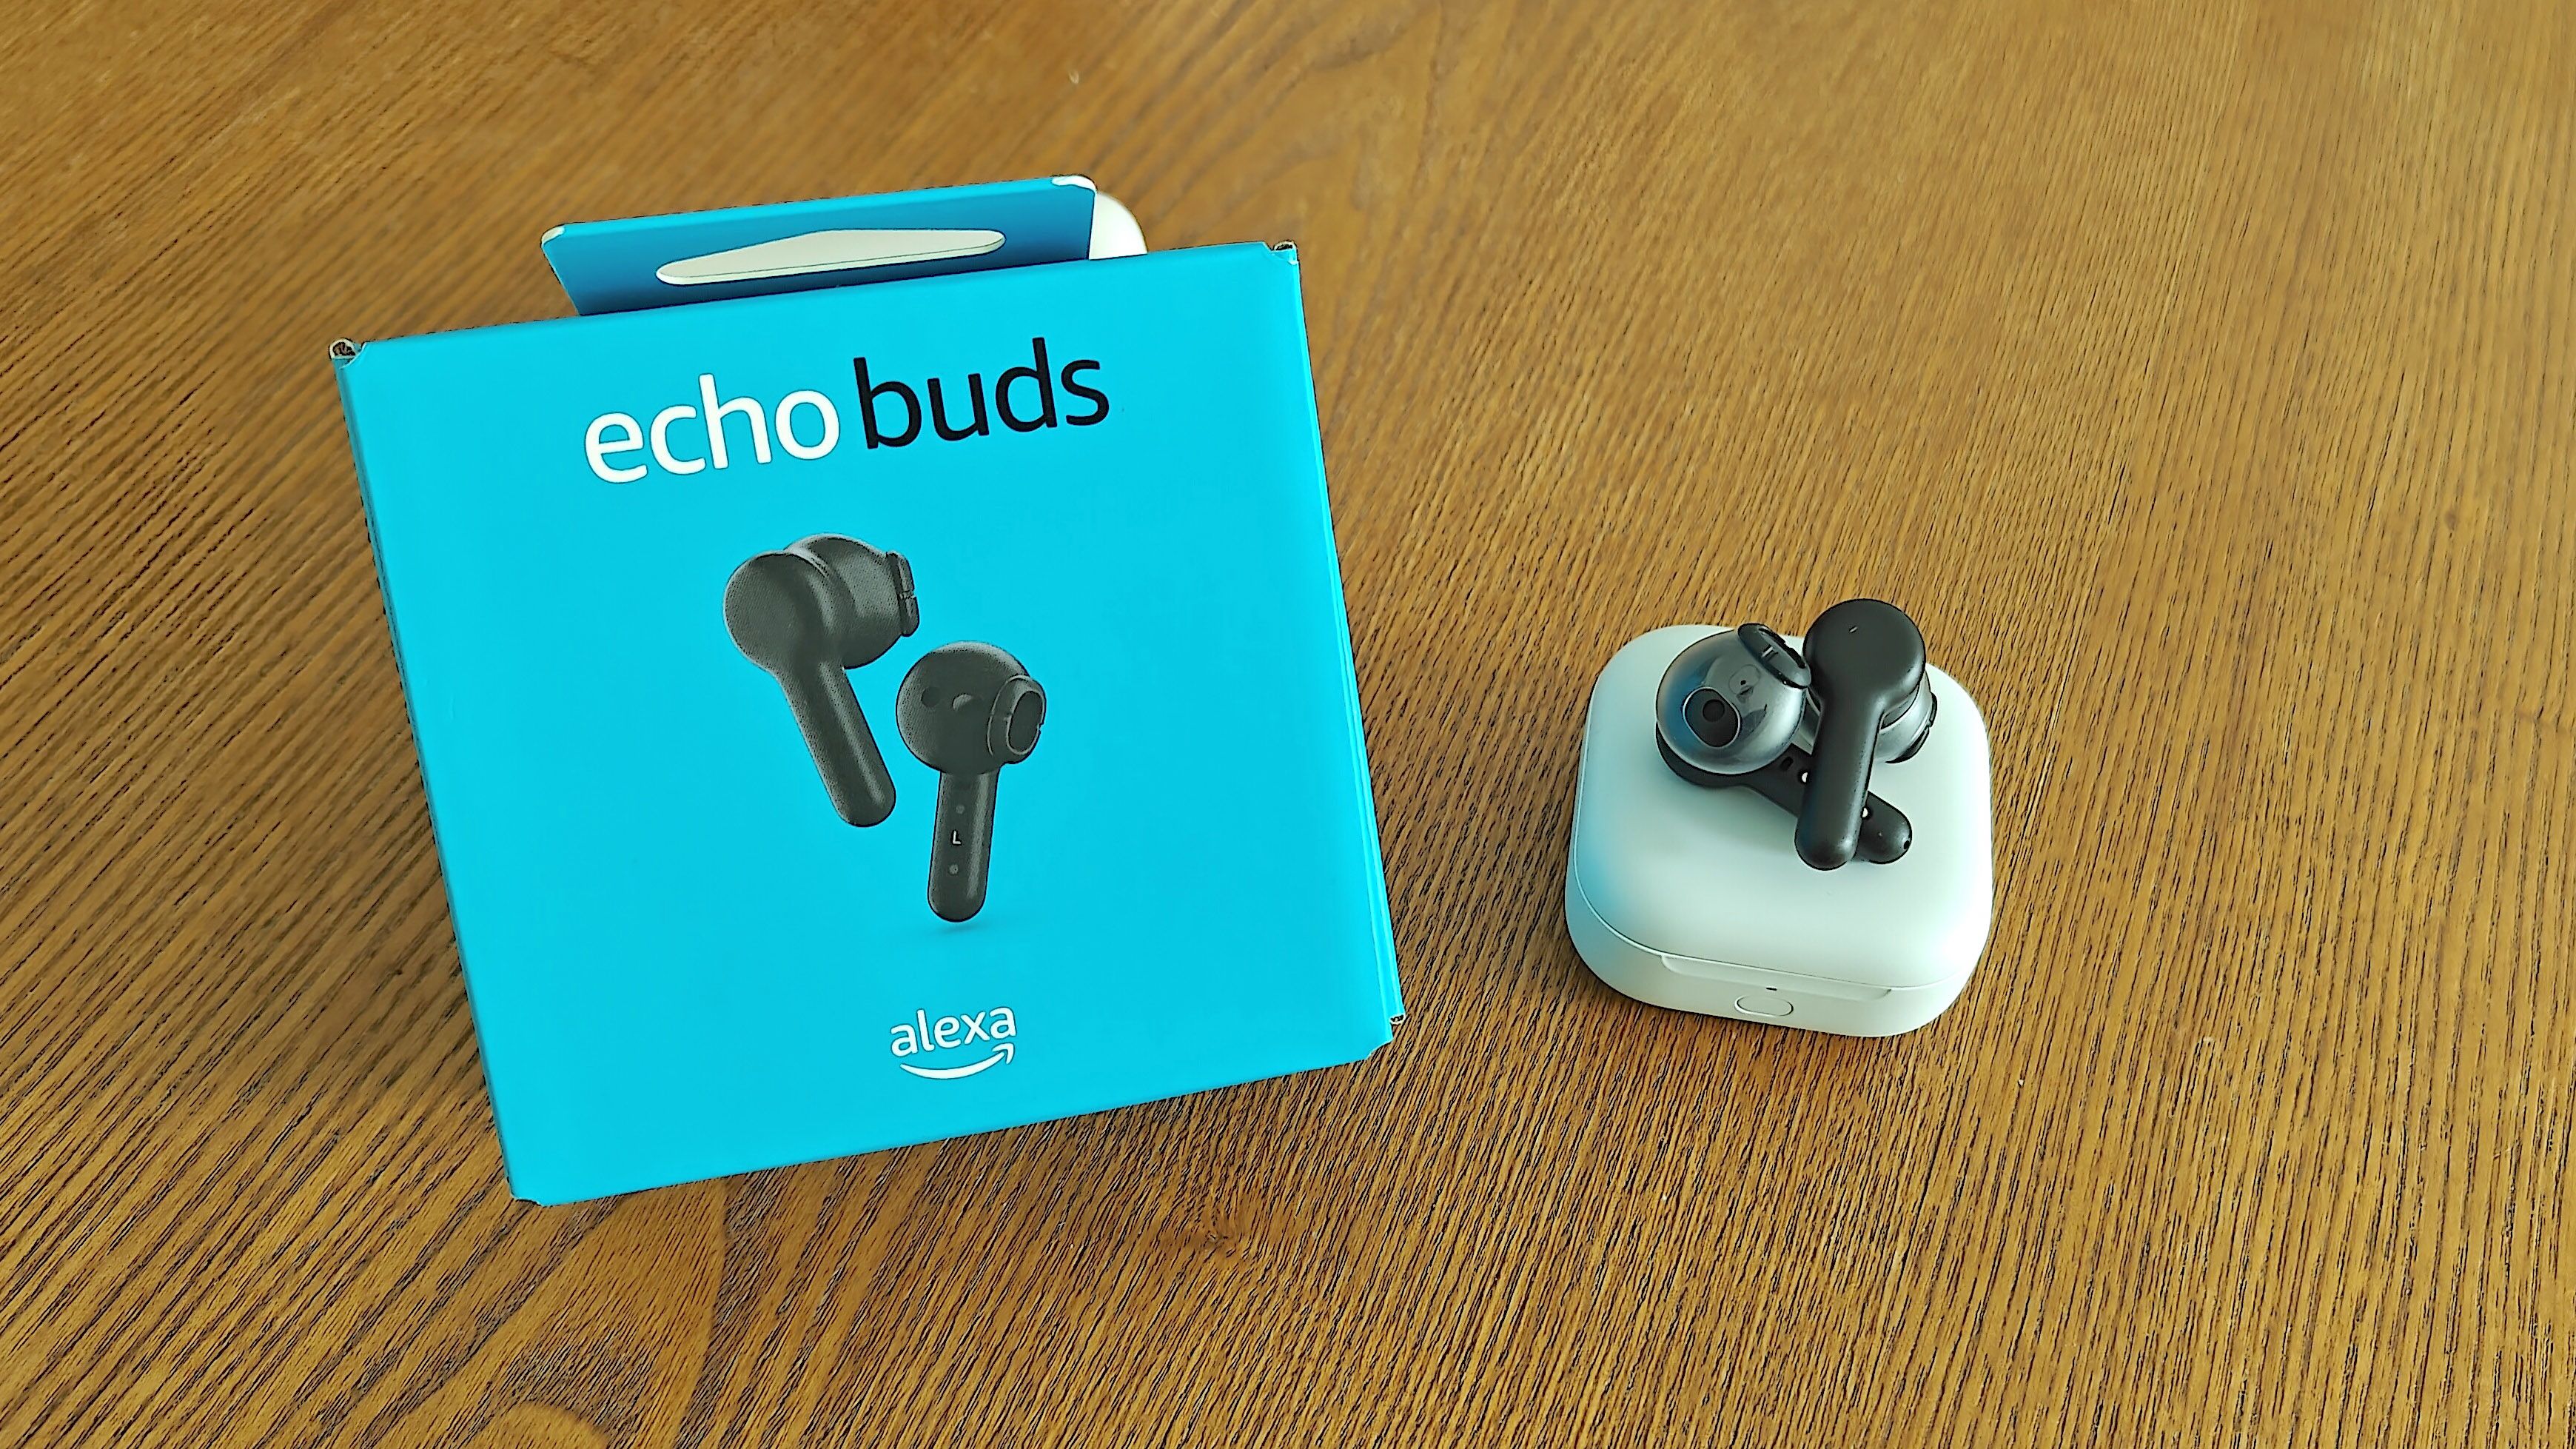 sells these impressive earbuds for $50. Here's why I like them